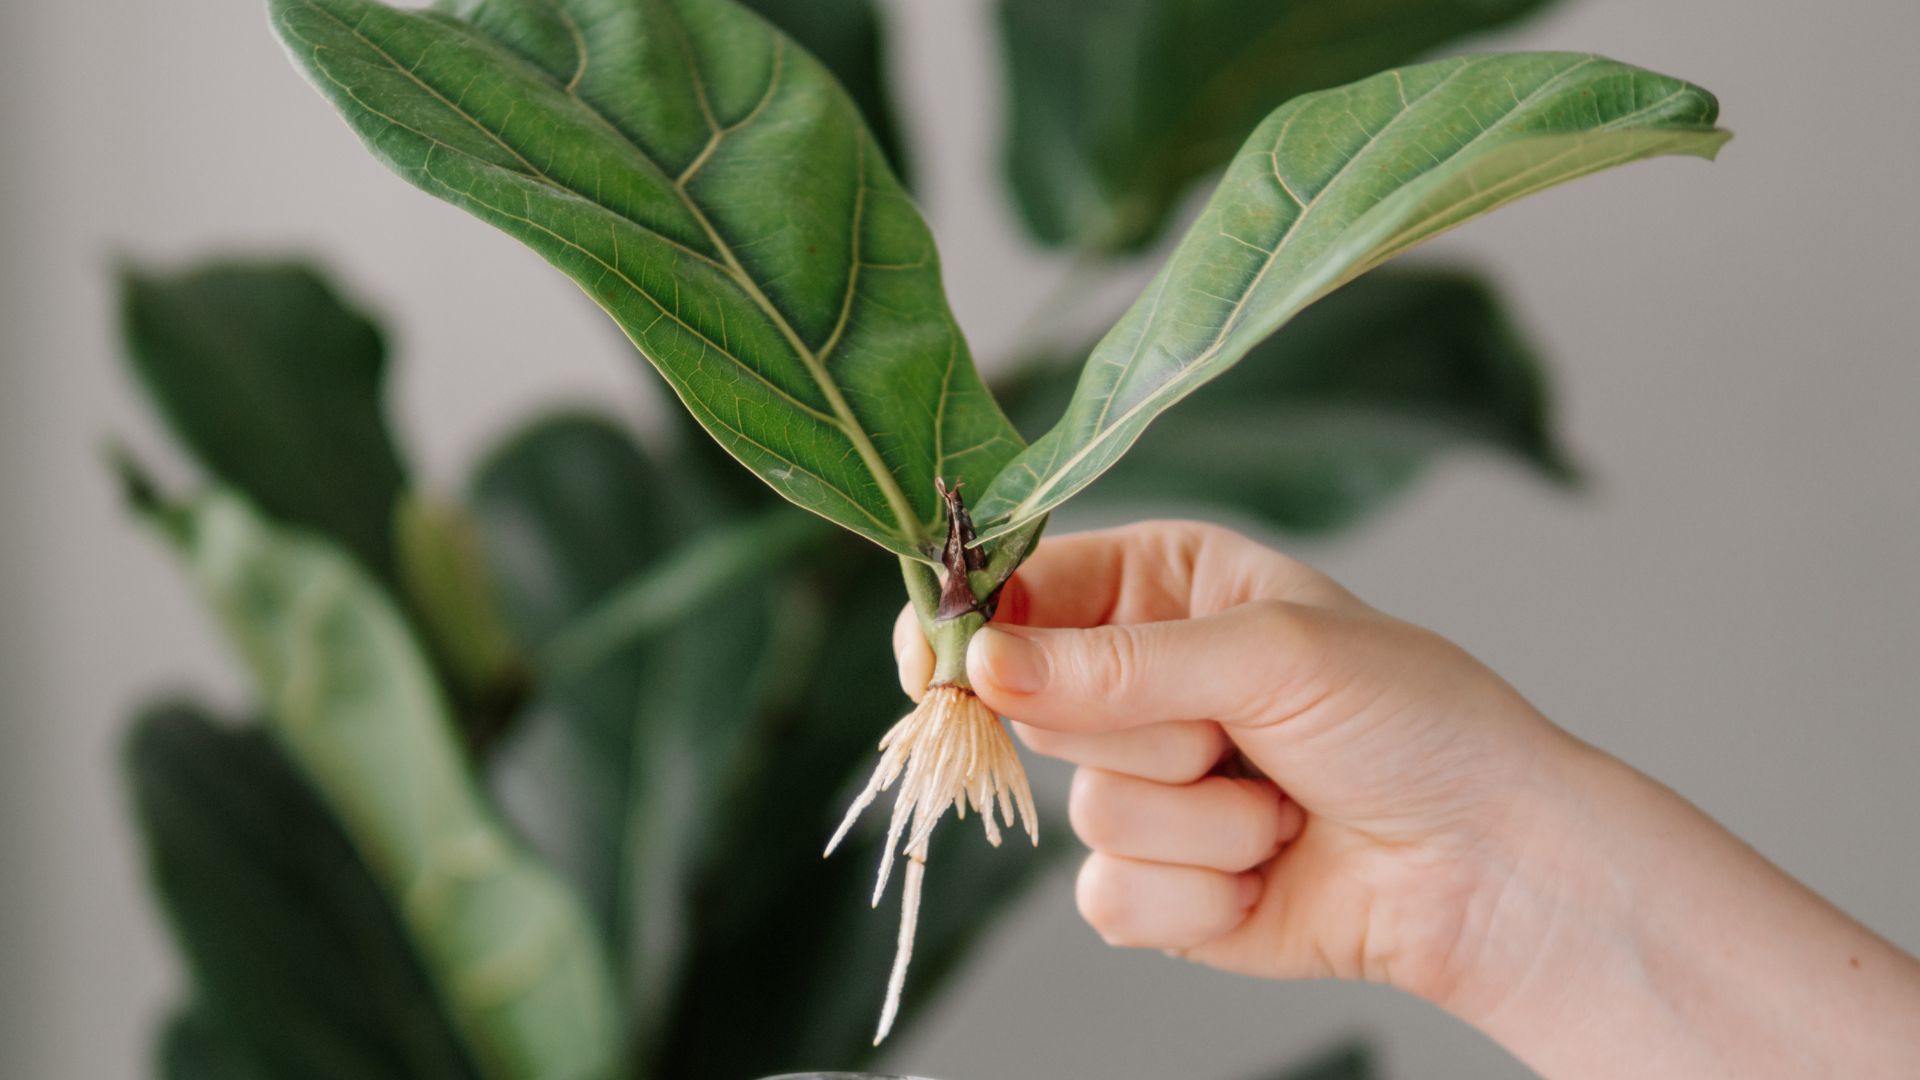 6 Easy Steps For Propagating Fiddle-Leaf Figs